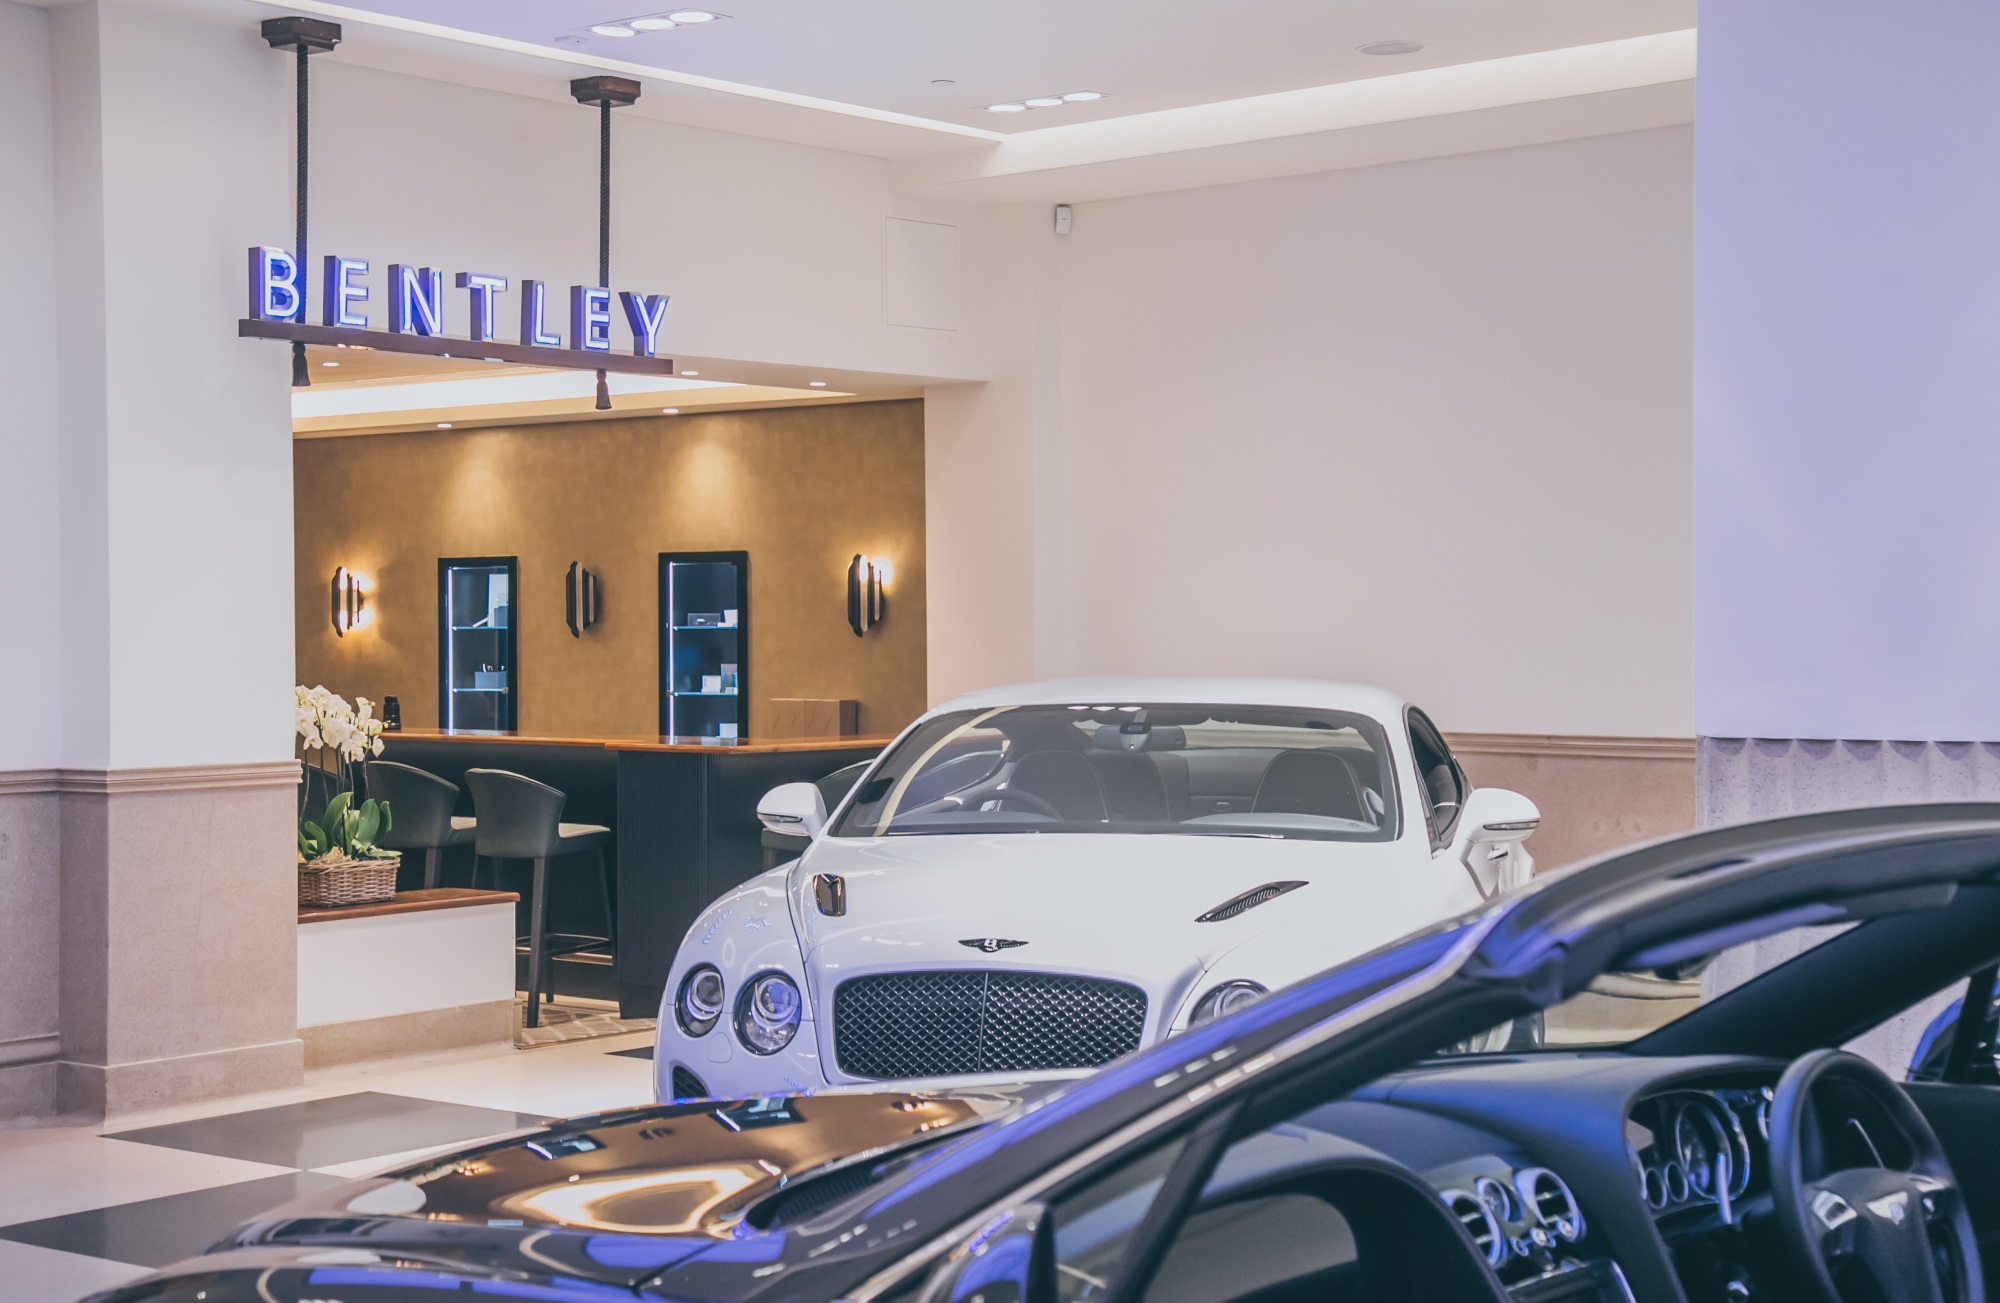 A leather trimmed bar and a private commissioning suite among new elements at Bentley's Mayfair showroom